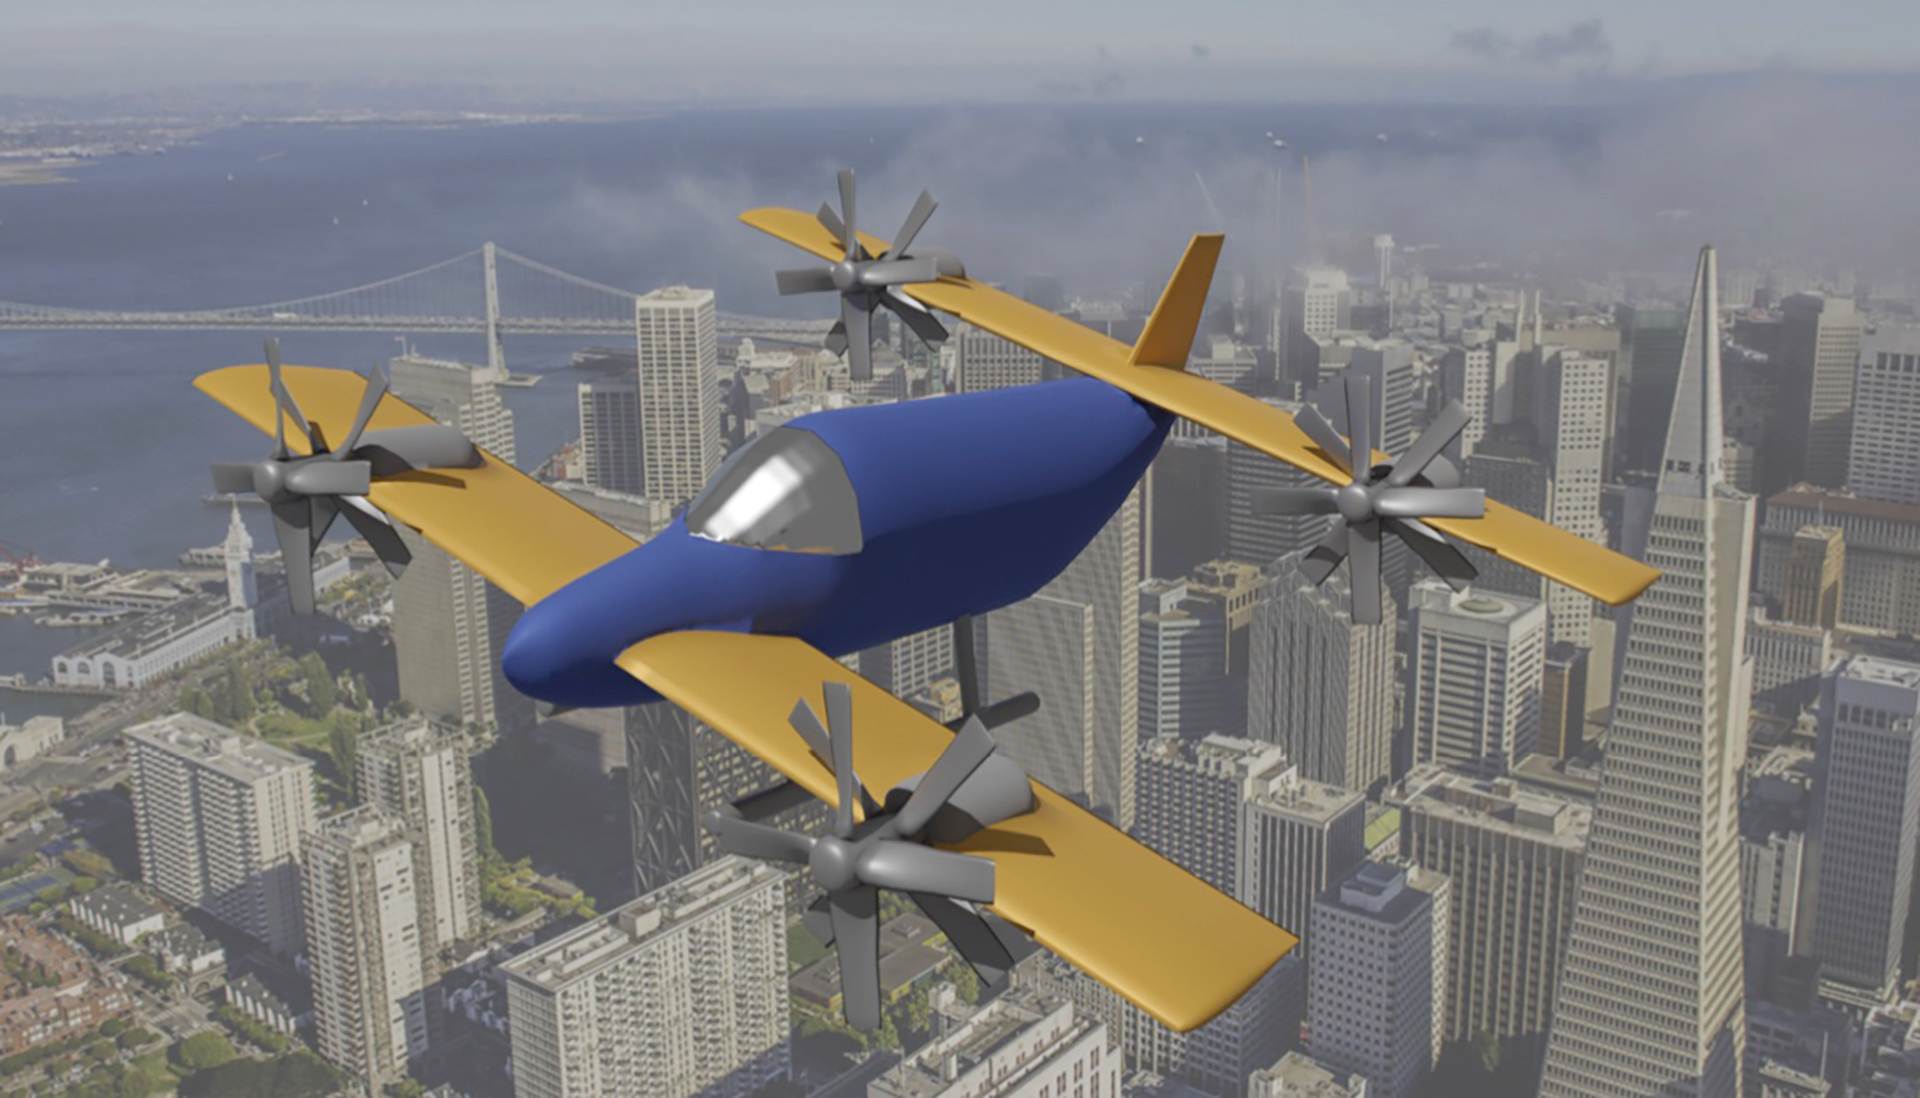 Electric Transport 1, a blue and yellow aircraft in flight over San Francisco.